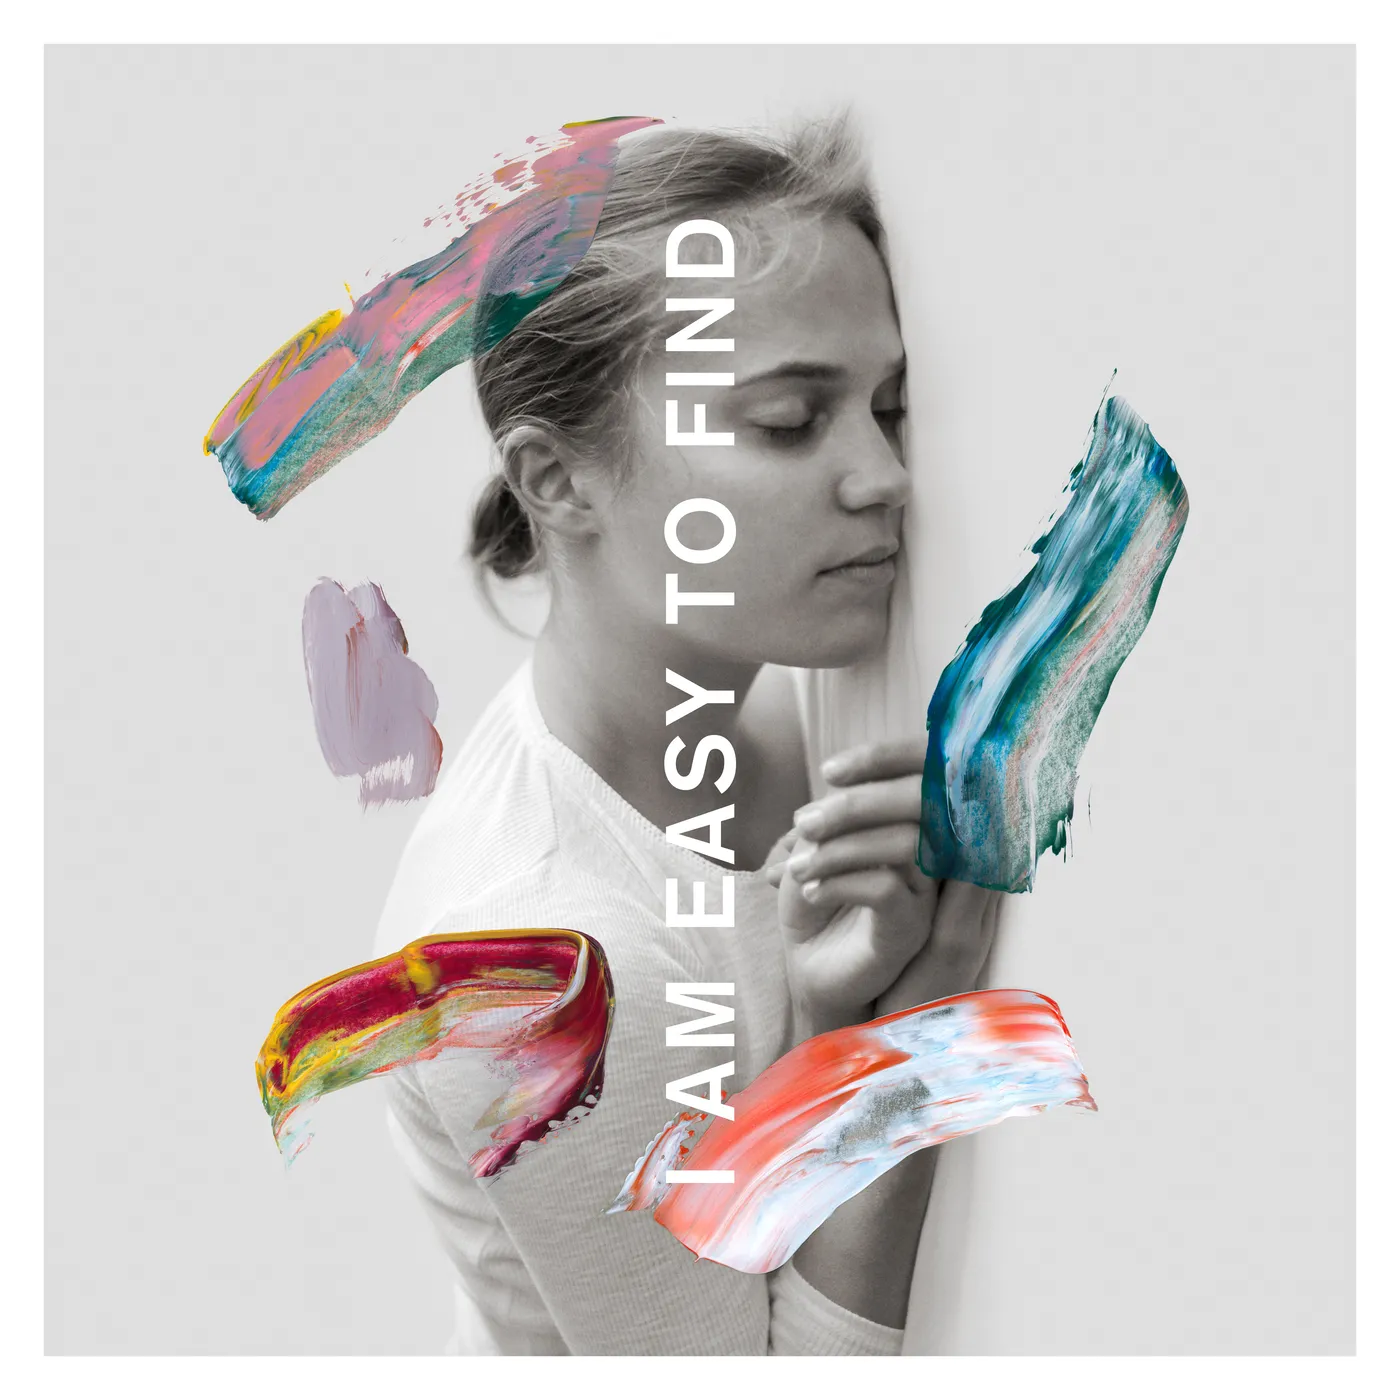 Buy I Am Easy to Find via Rough Trade